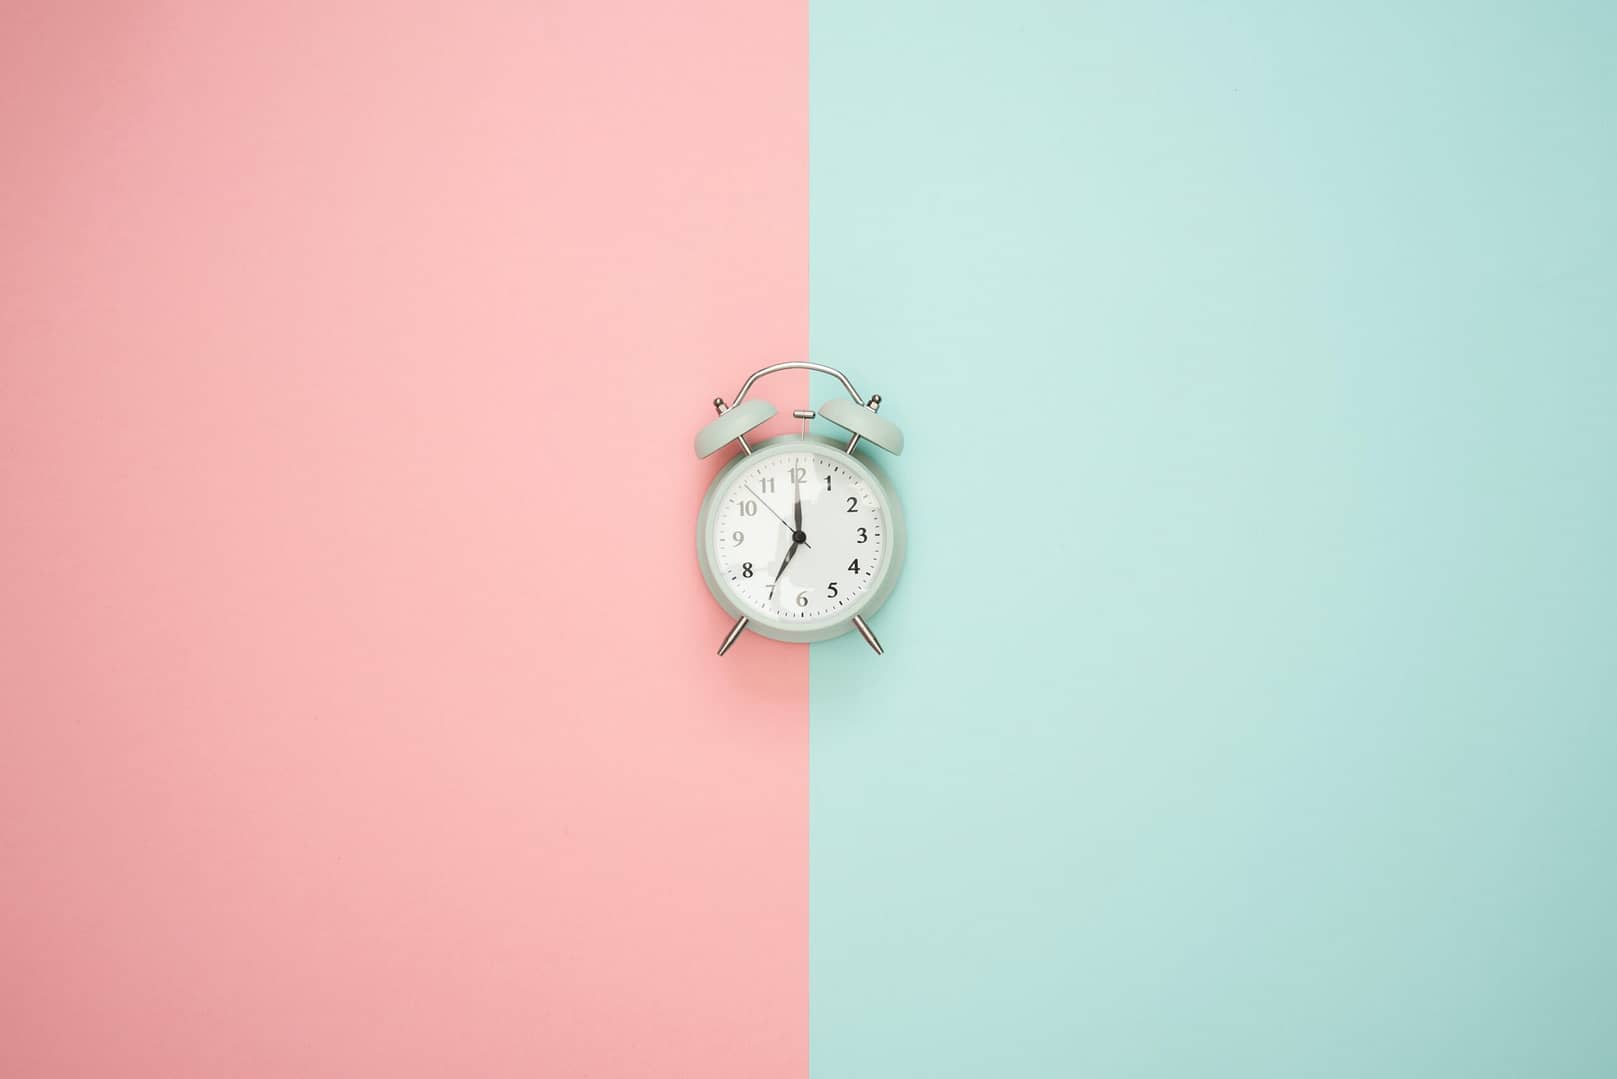 A clock split between two different colors.